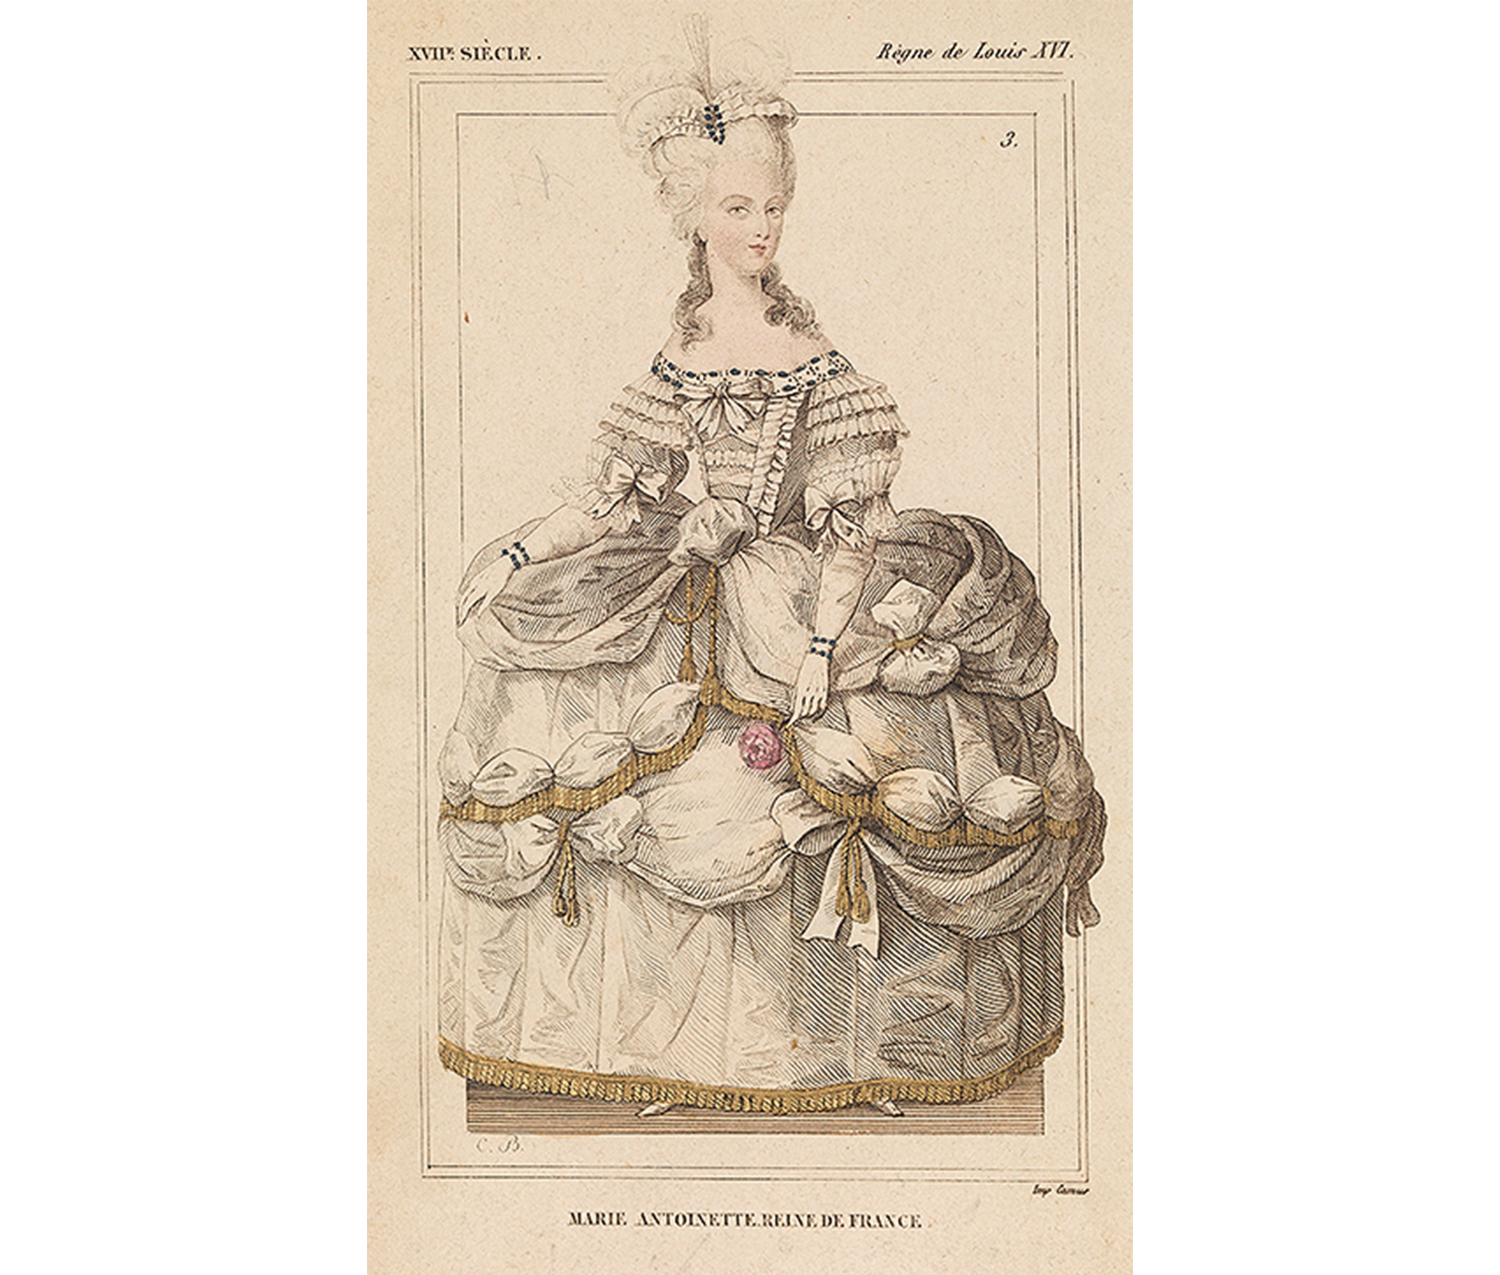 standing woman with elaborately puffed pannier dress with gold ribbon, tall hairdo decorated with ribbons and brooch